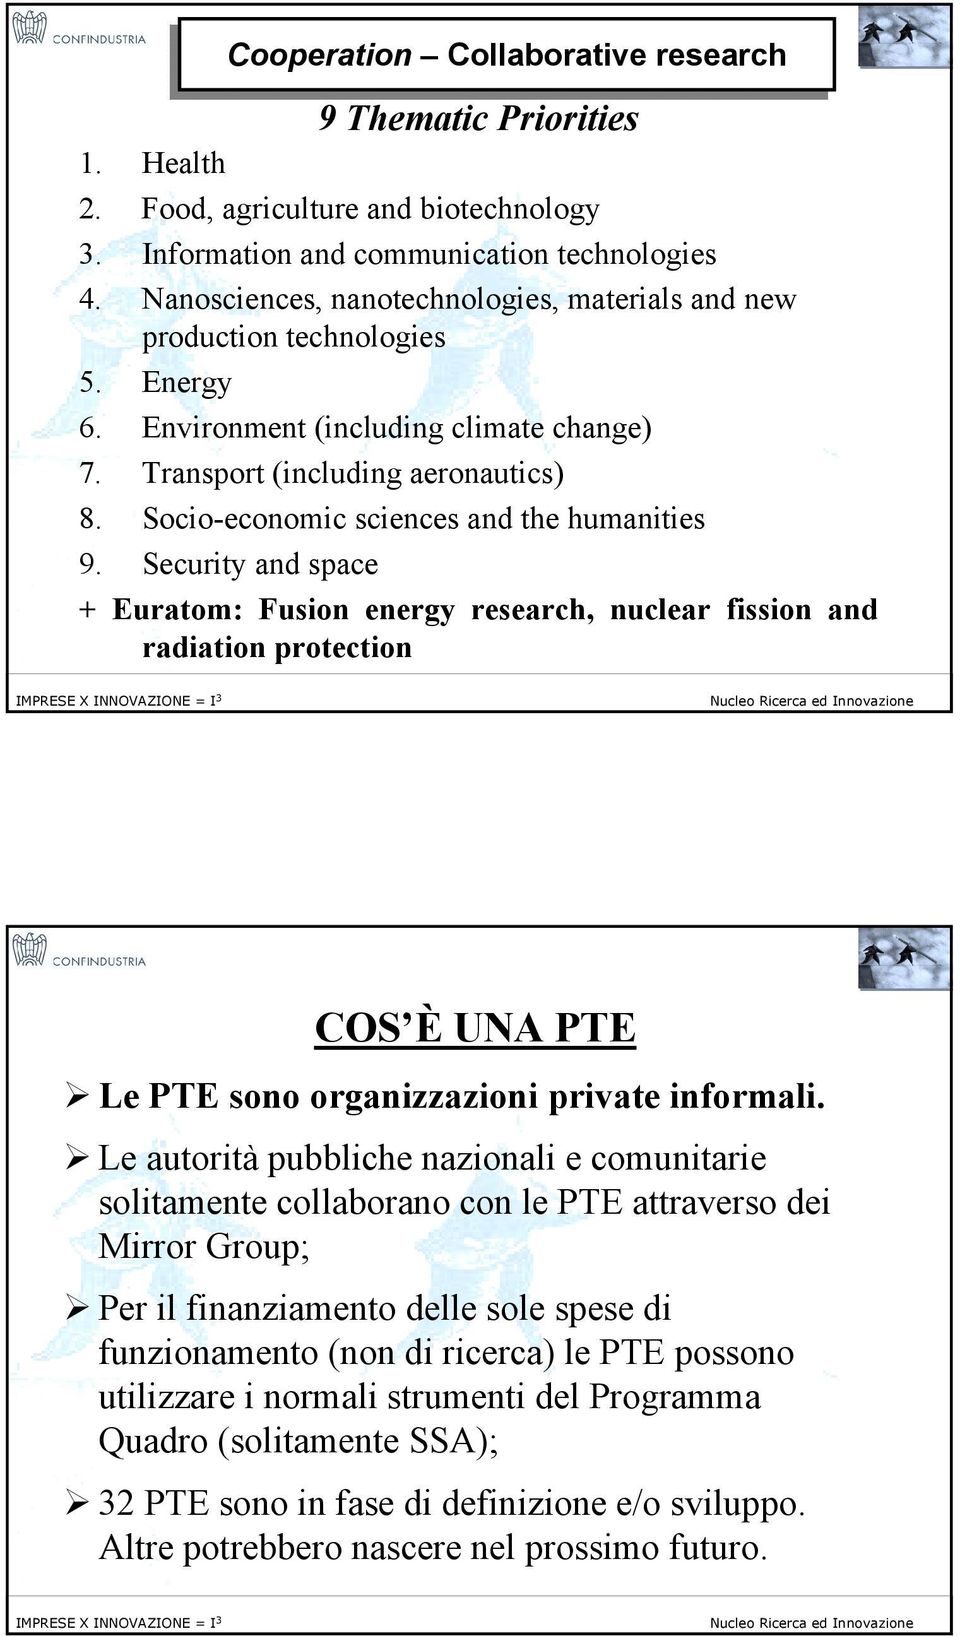 Socio-economic sciences and the humanities 9. Security and space + Euratom: Fusion energy research, nuclear fission and radiation protection 10 COS È UNA PTE!